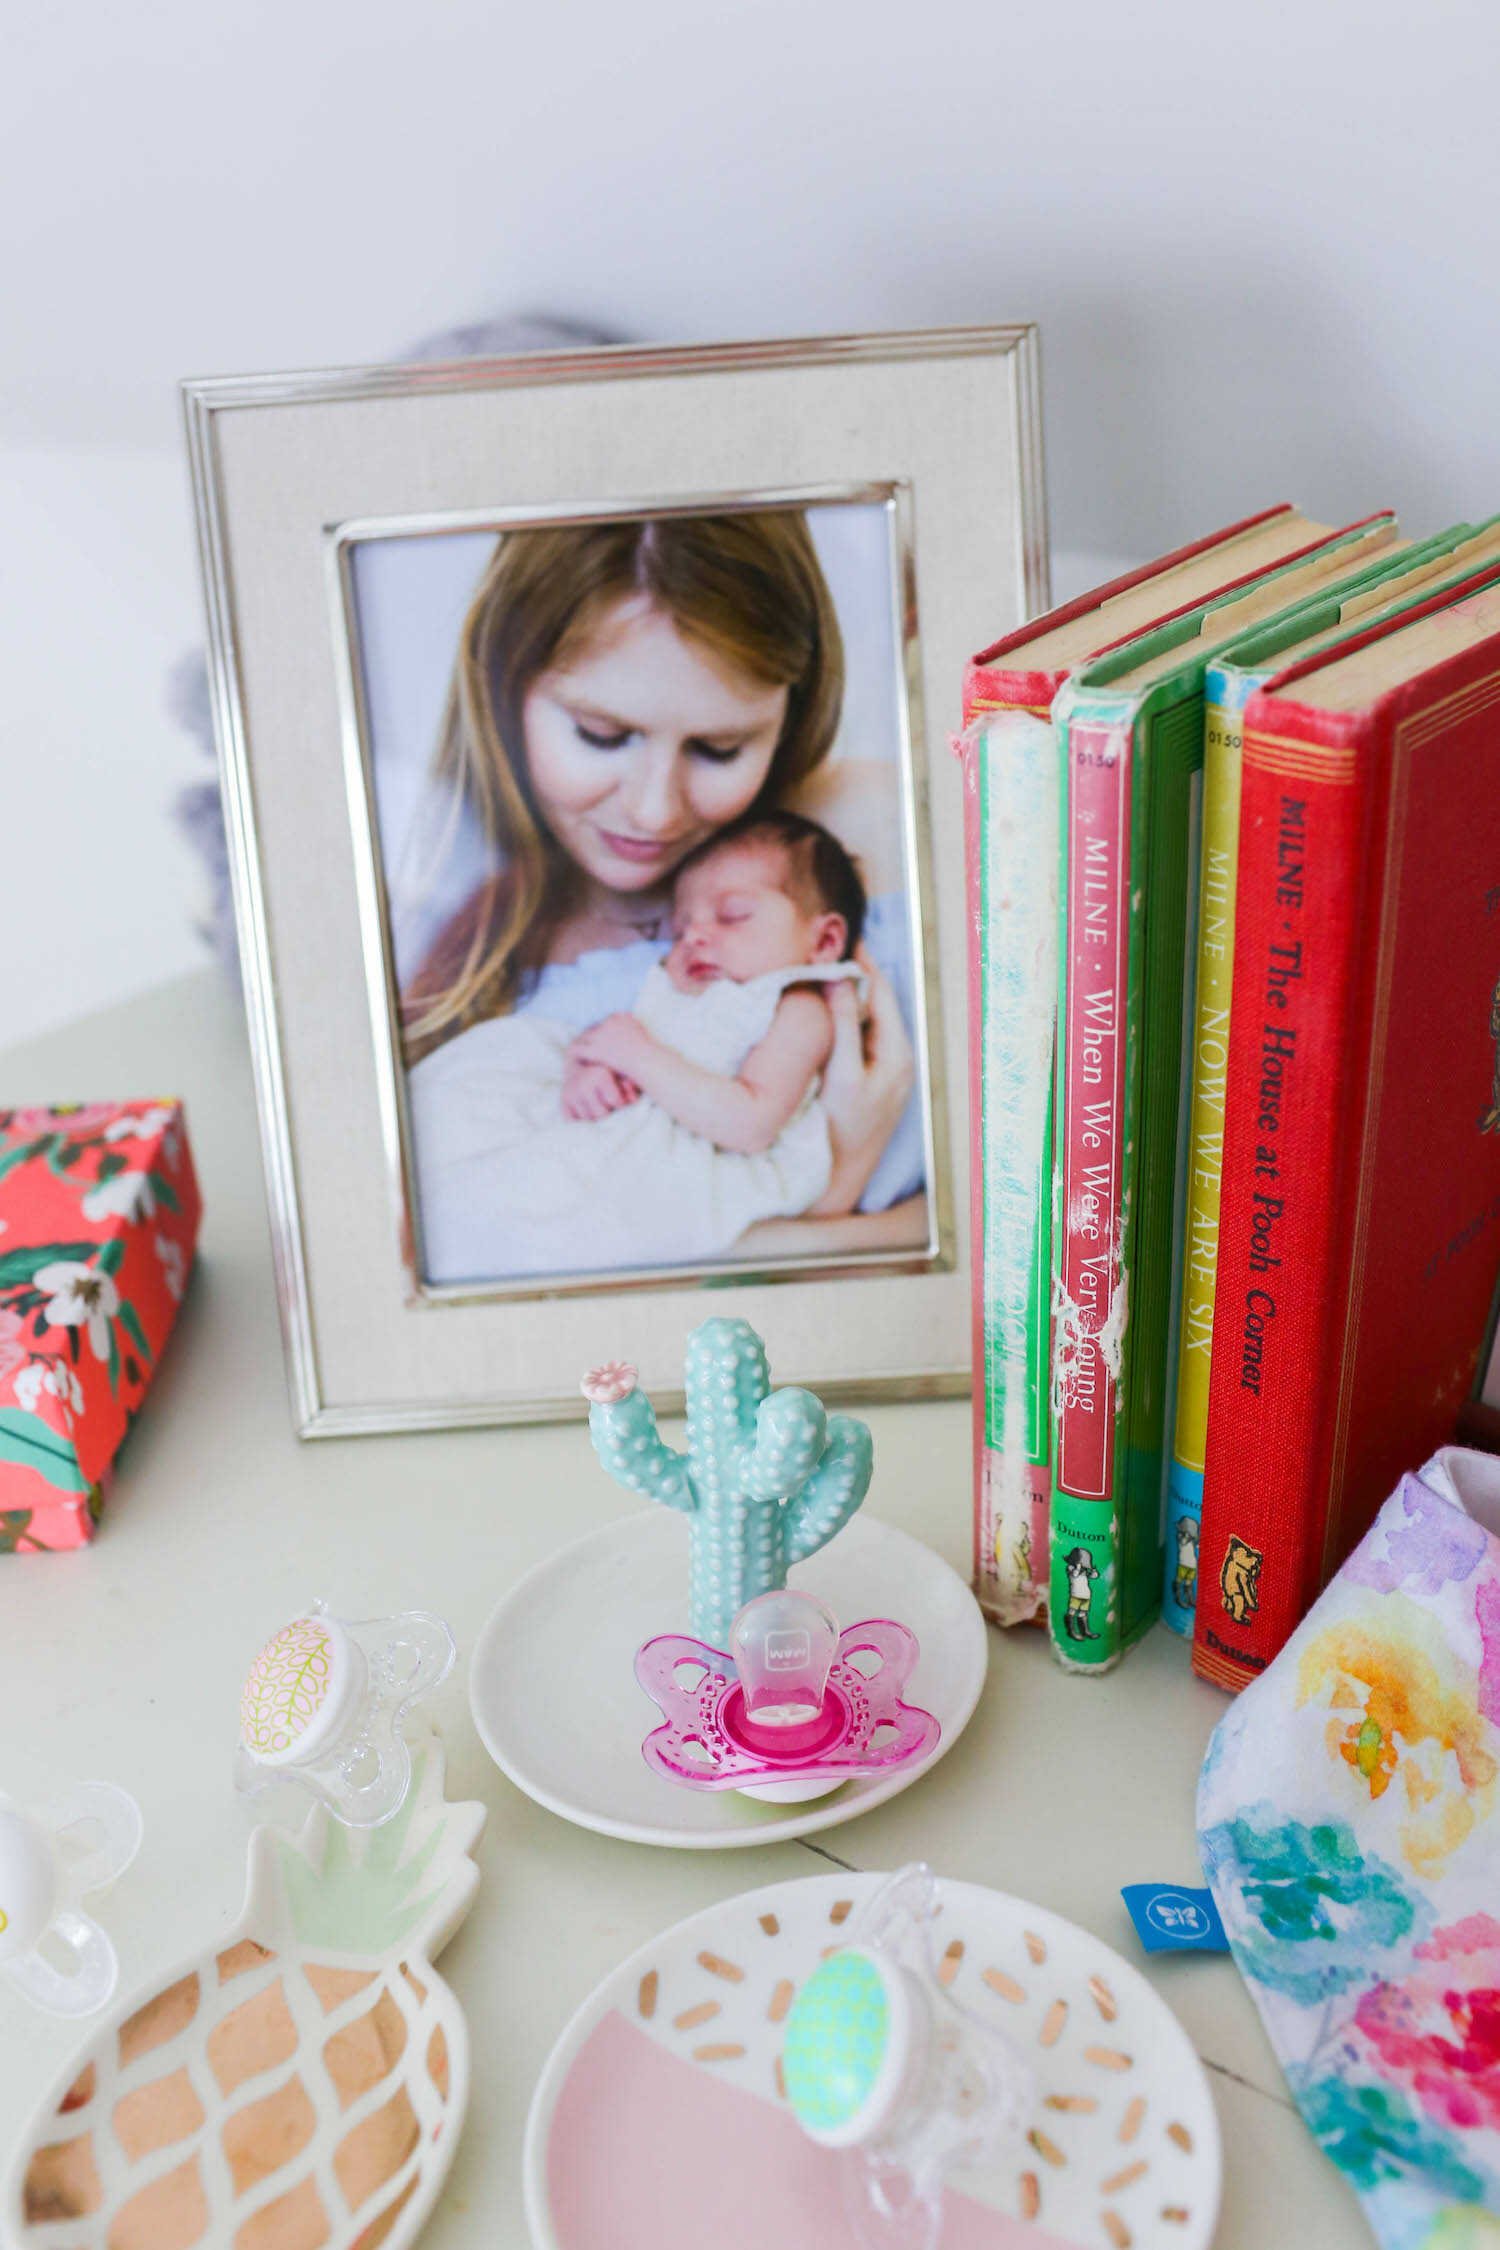 Printed Photo Storage – The Best Ways To Store Your Images